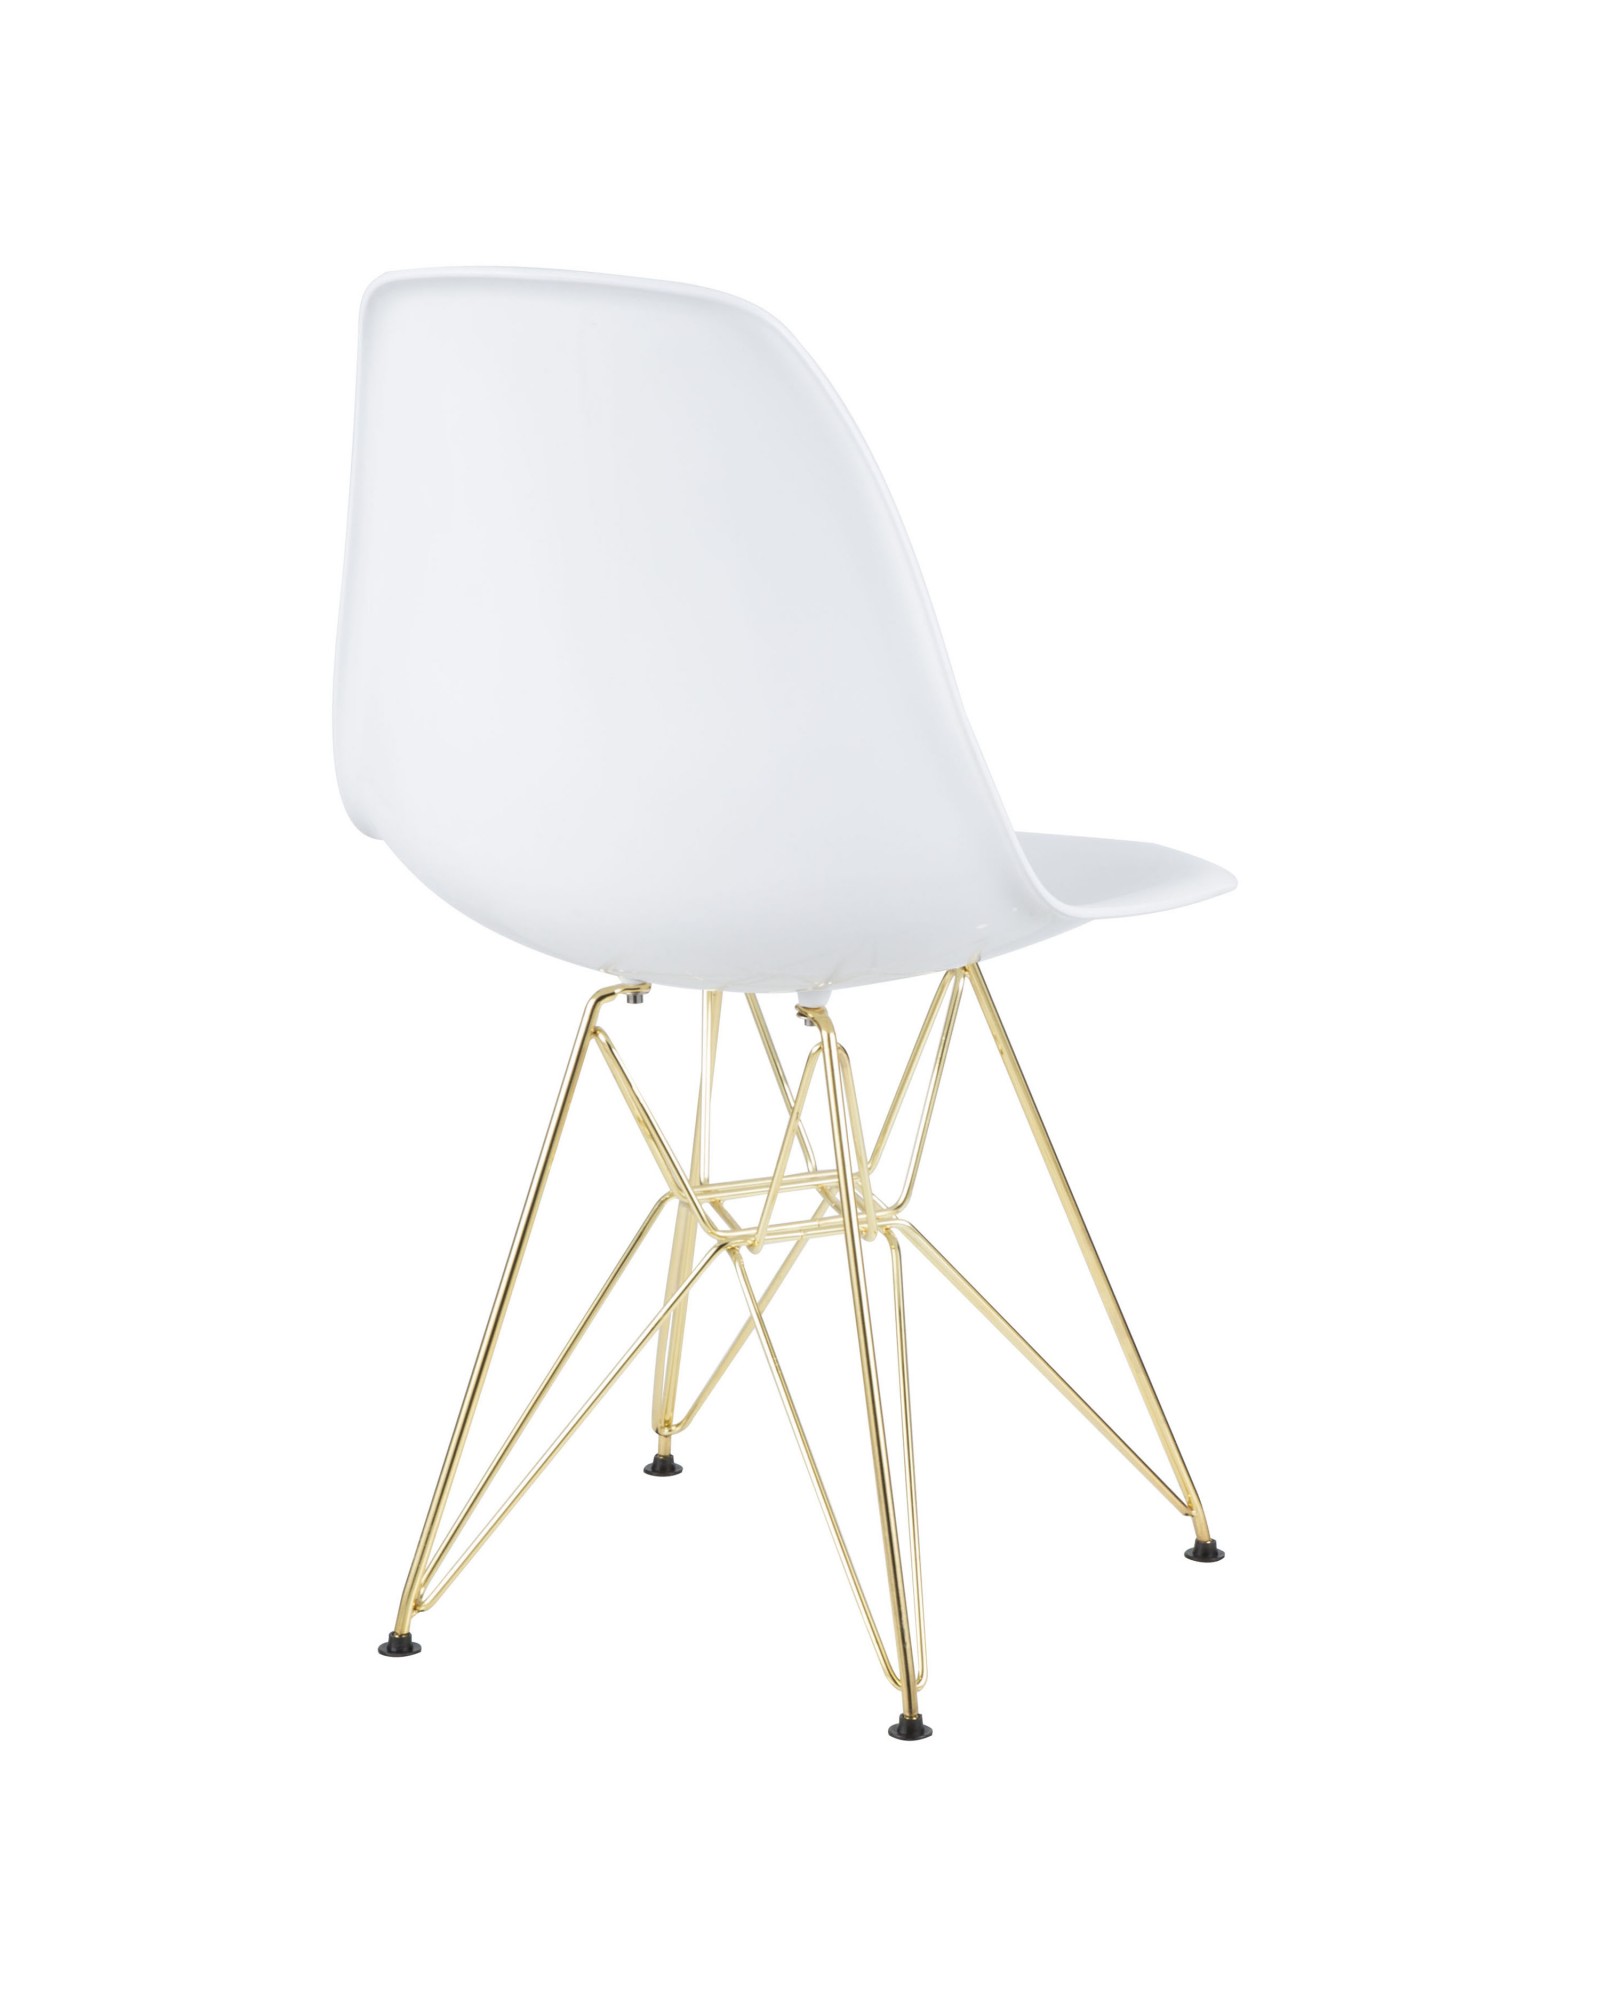 Brady Mid-Century Modern Dining/Accent Chair in Gold and White -Set of 2